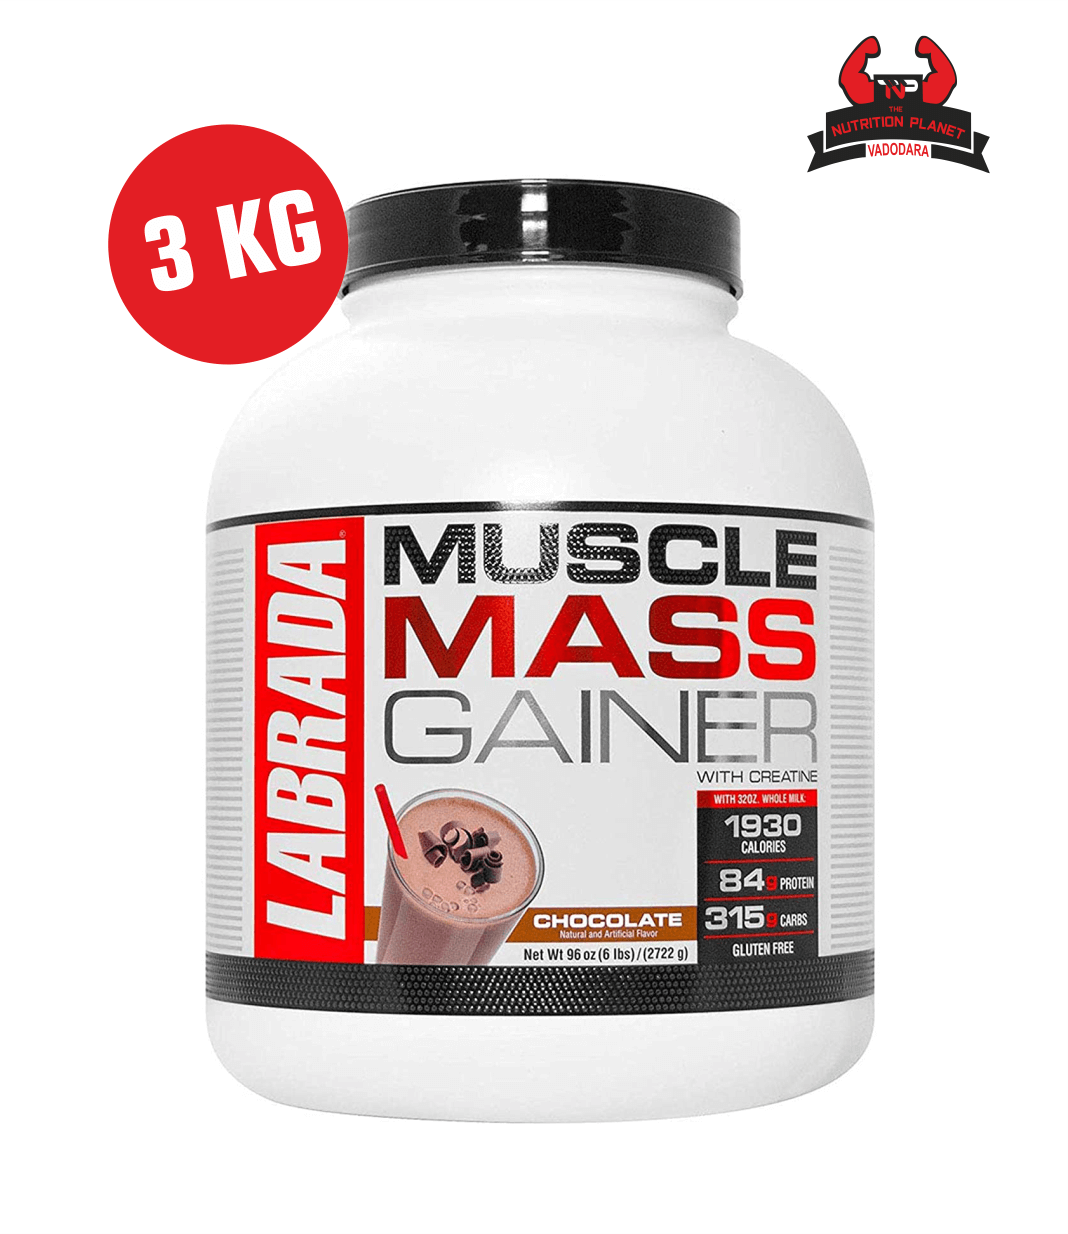 Labrada Muscle Mass Gainer 3 Kg (Chocolate Flavor)